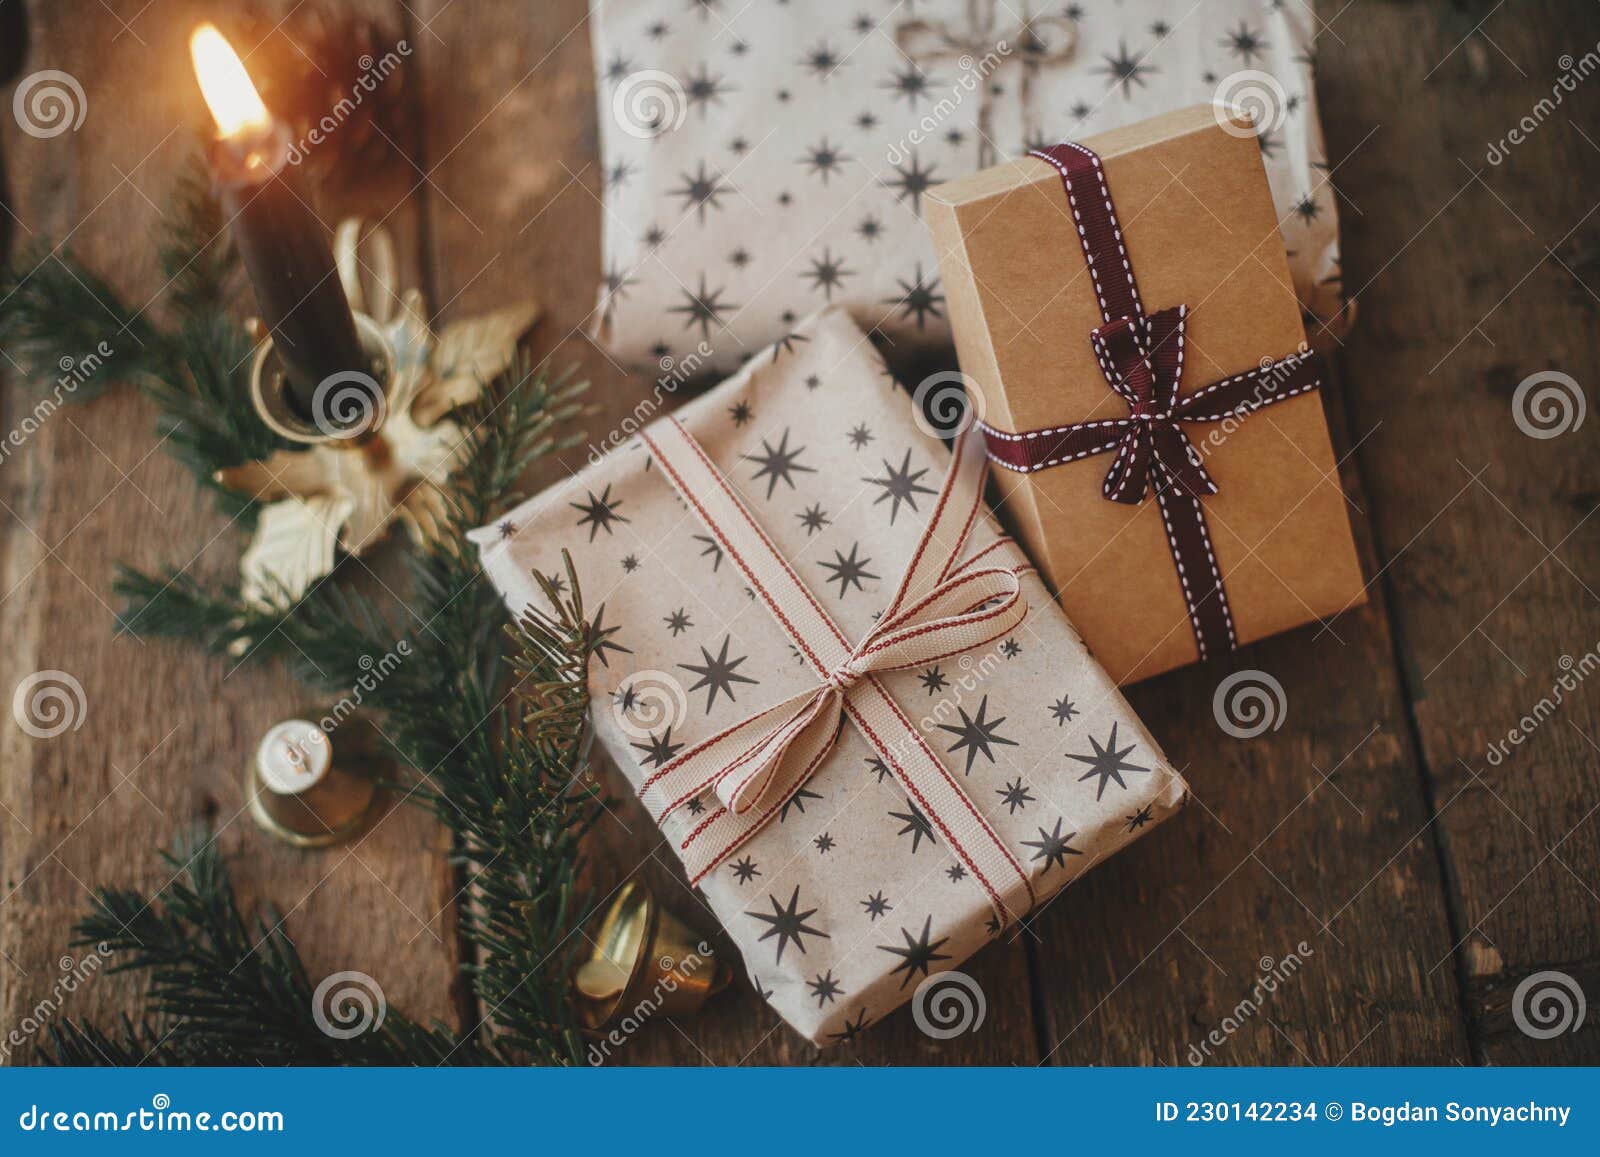 Christmas rustic flat lay. Stylish christmas gift box, wrapping paper,  wooden reindeer Stock Photo by Sonyachny